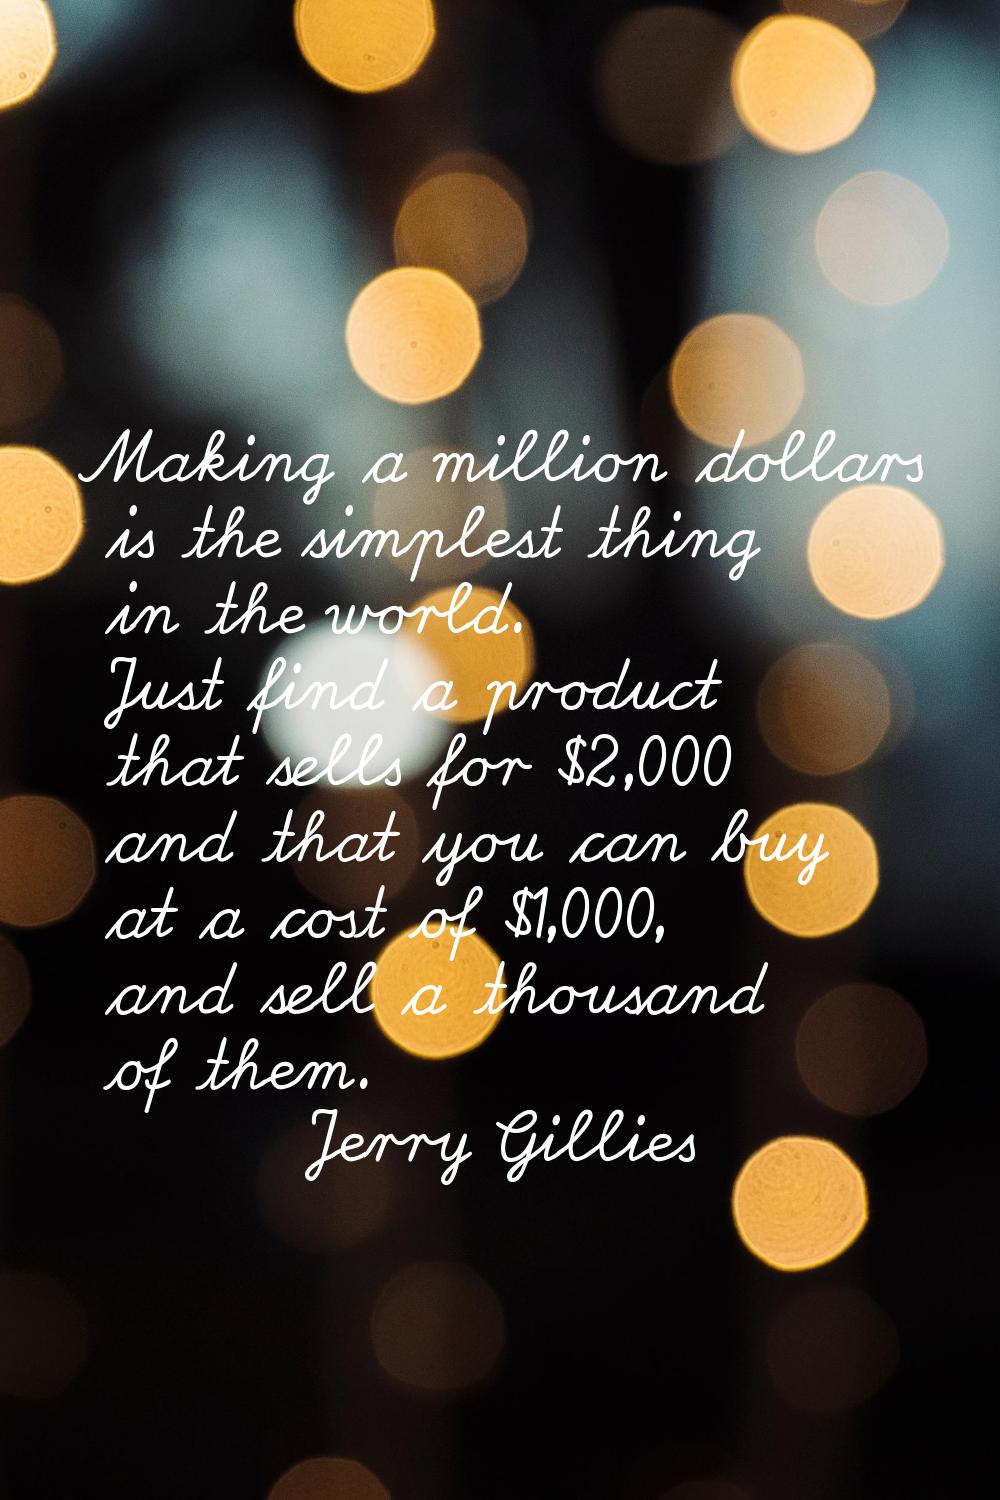 Making a million dollars is the simplest thing in the world. Just find a product that sells for $2,